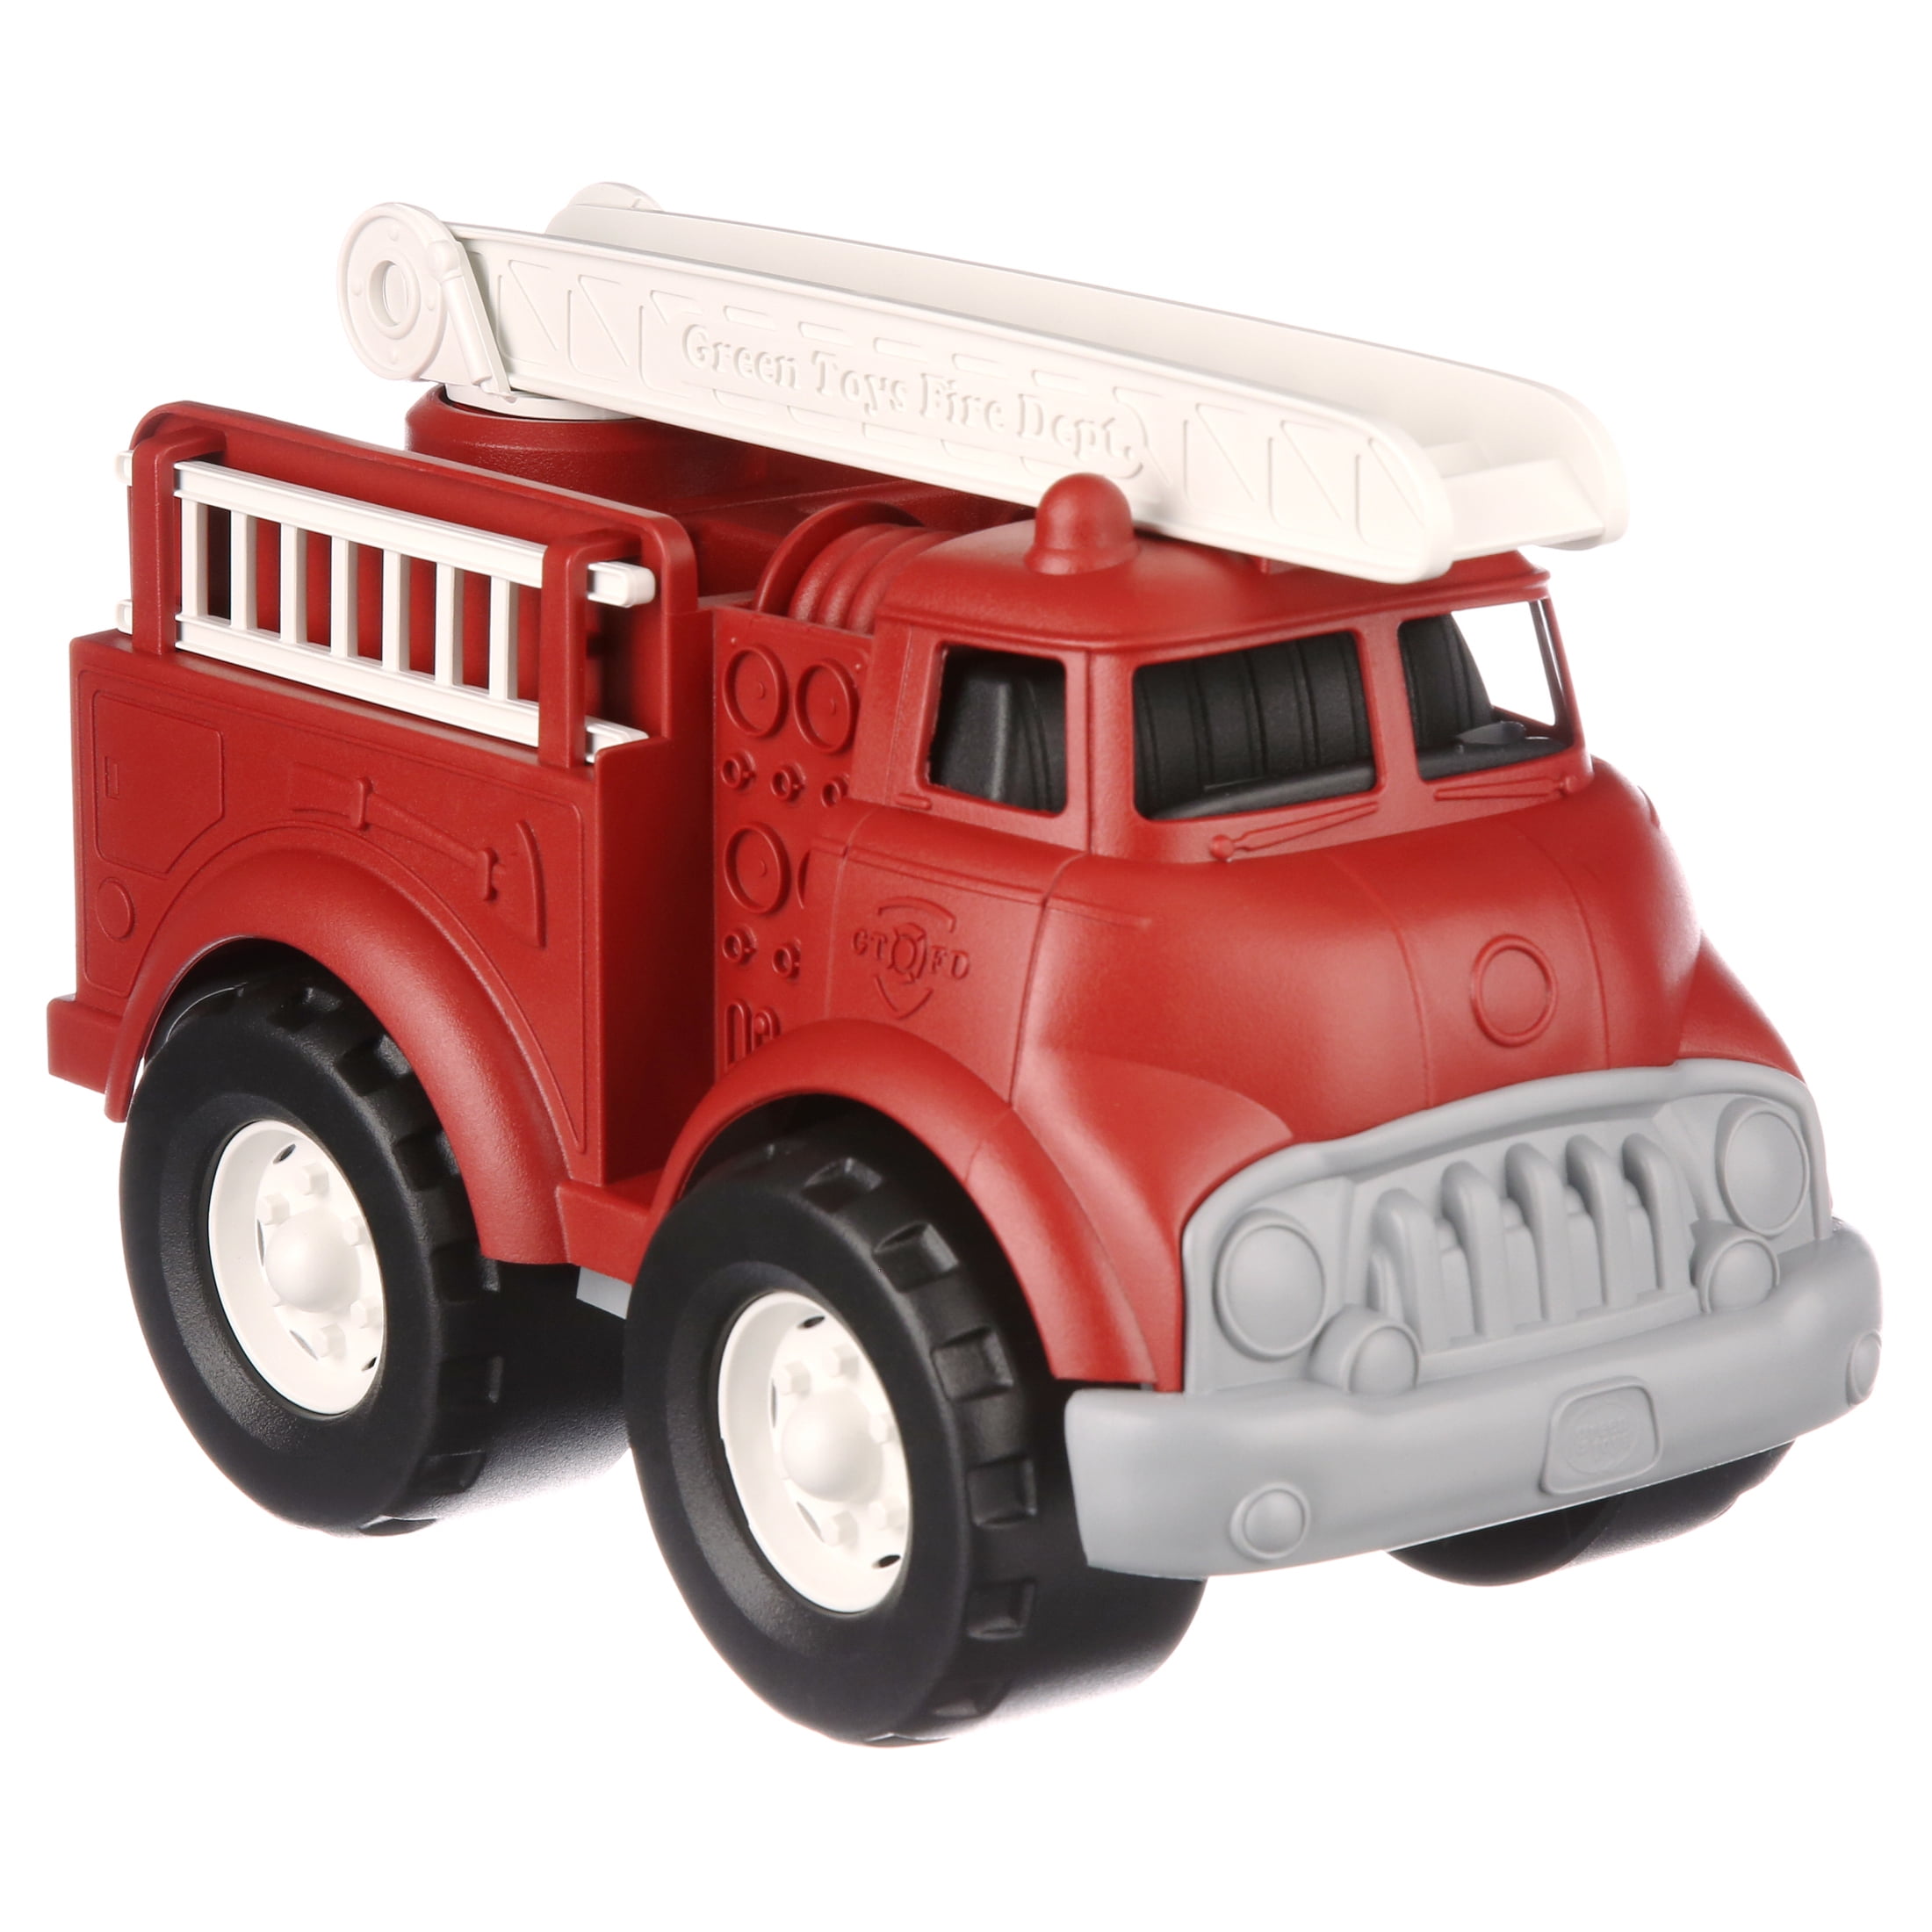 Green Toys Fire Truck Vehicle Toy Pink 11 x 6.5 x 7.5